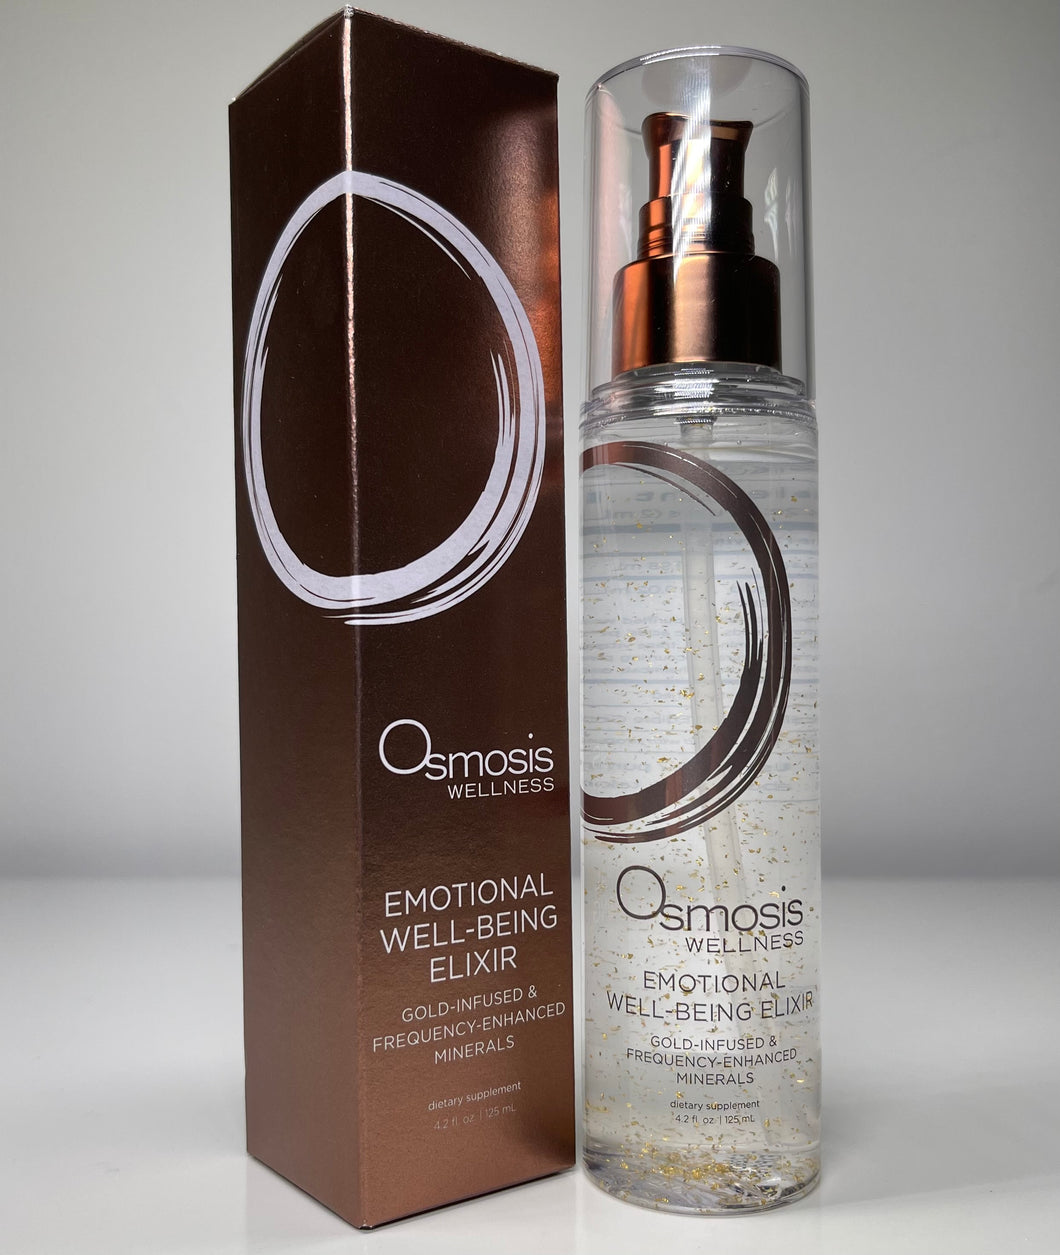 Osmosis Emotional Well Being Elixir Gold Infused & Frequency Enhanced Minerals - European Beauty by B